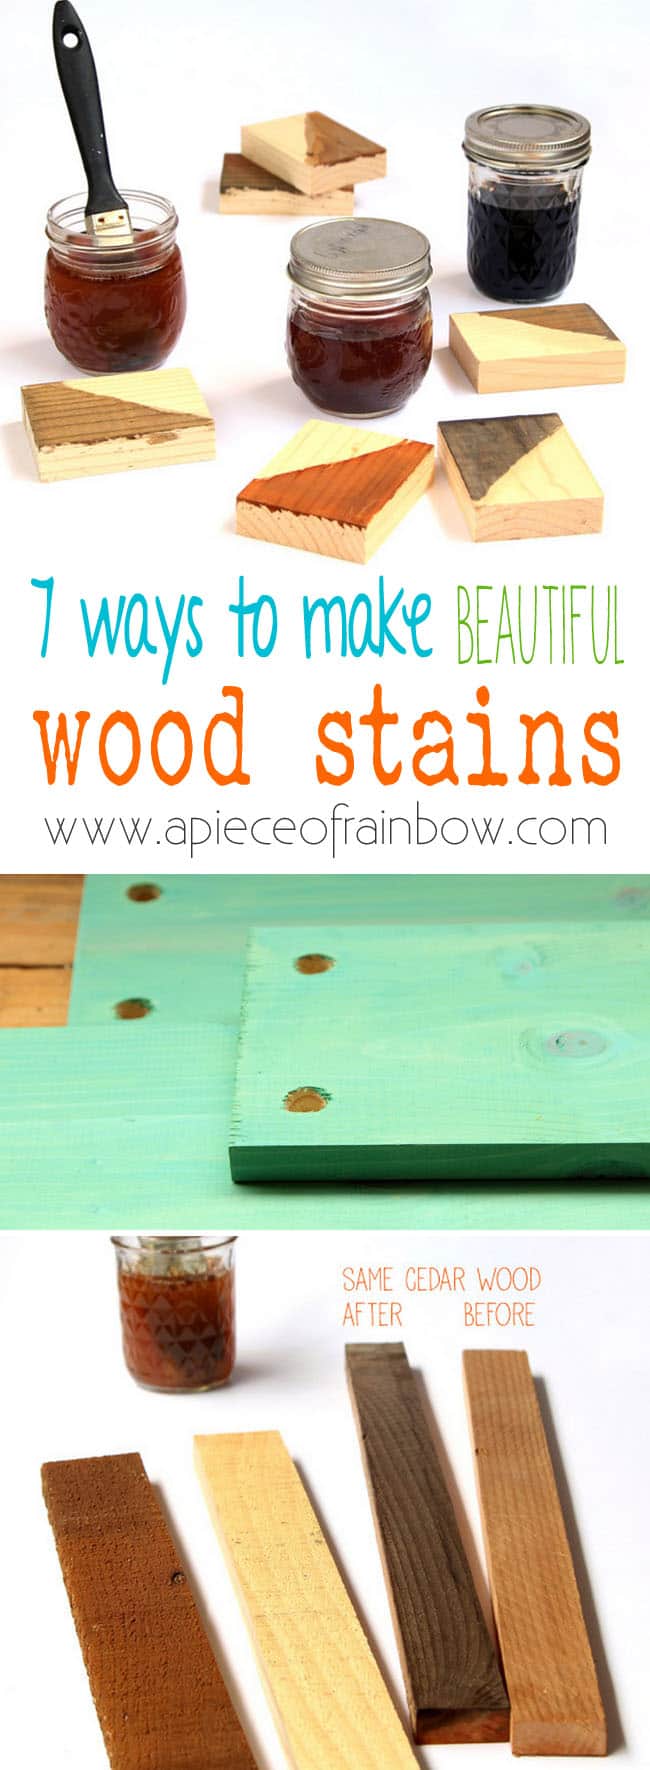 7 recipes to make wood stains in any color using natural household materials! These quick and easy wood stains are super effective, long lasting, low cost, and non-toxic!